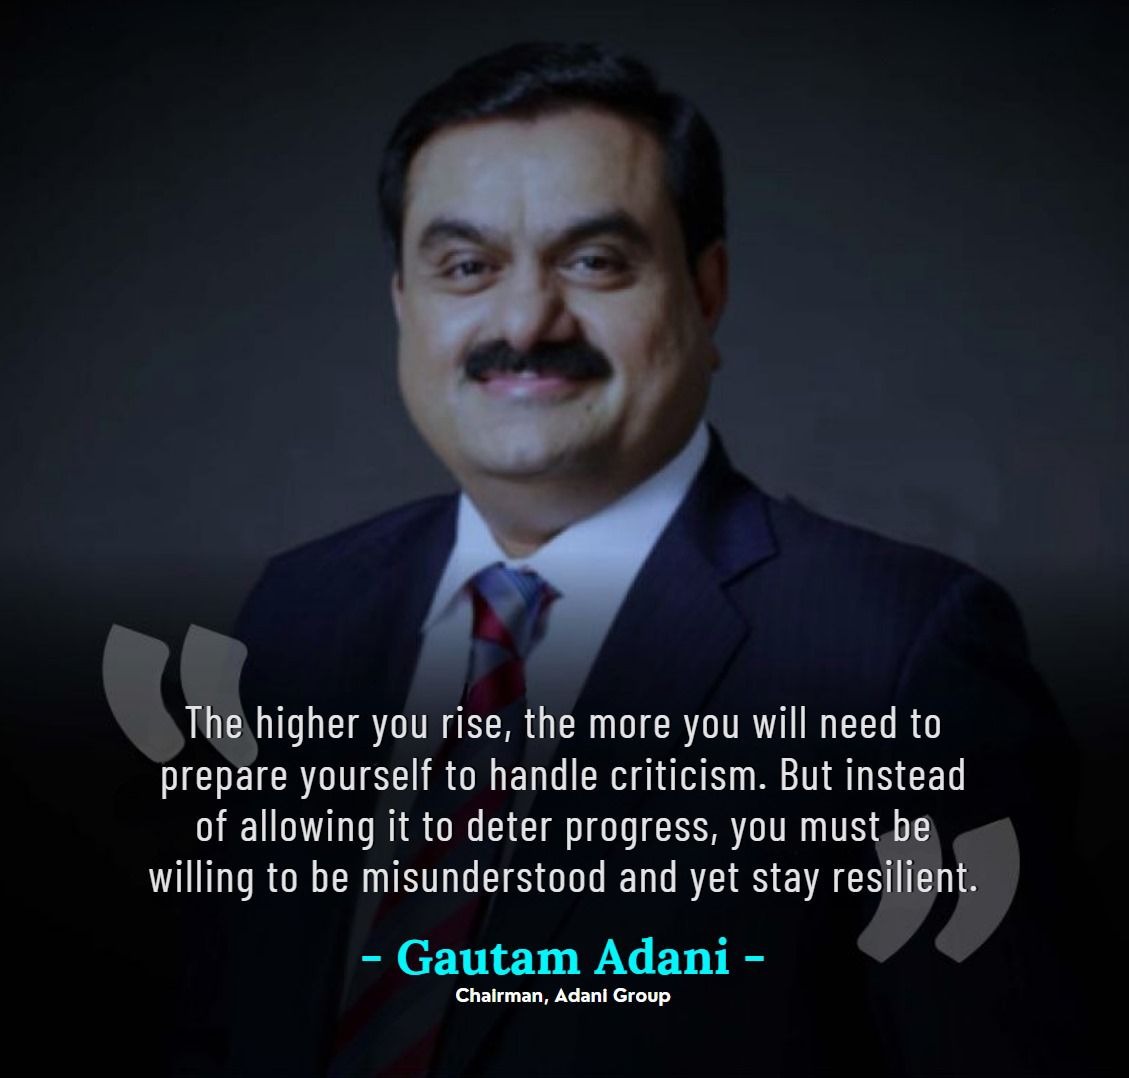 #Adani founded a global trading business at 29 to export and import polymers, metals, petrochemicals, textiles, and agroproducts. The company became India's largest worldwide trader in two years. #MeraRoleModelAdani